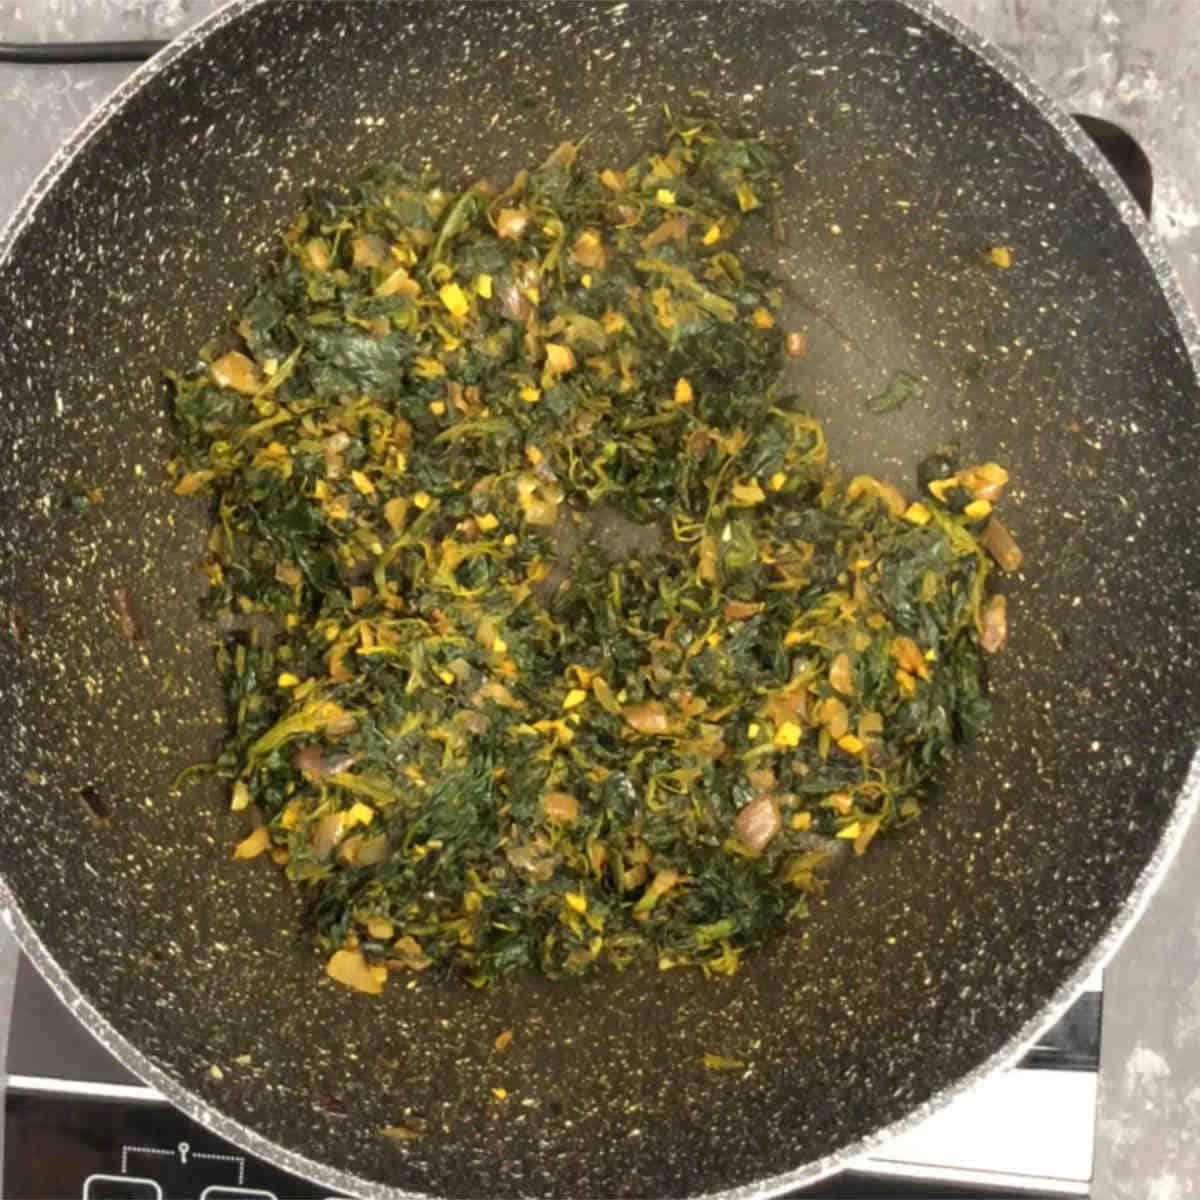 Cook the spinach and spices well.